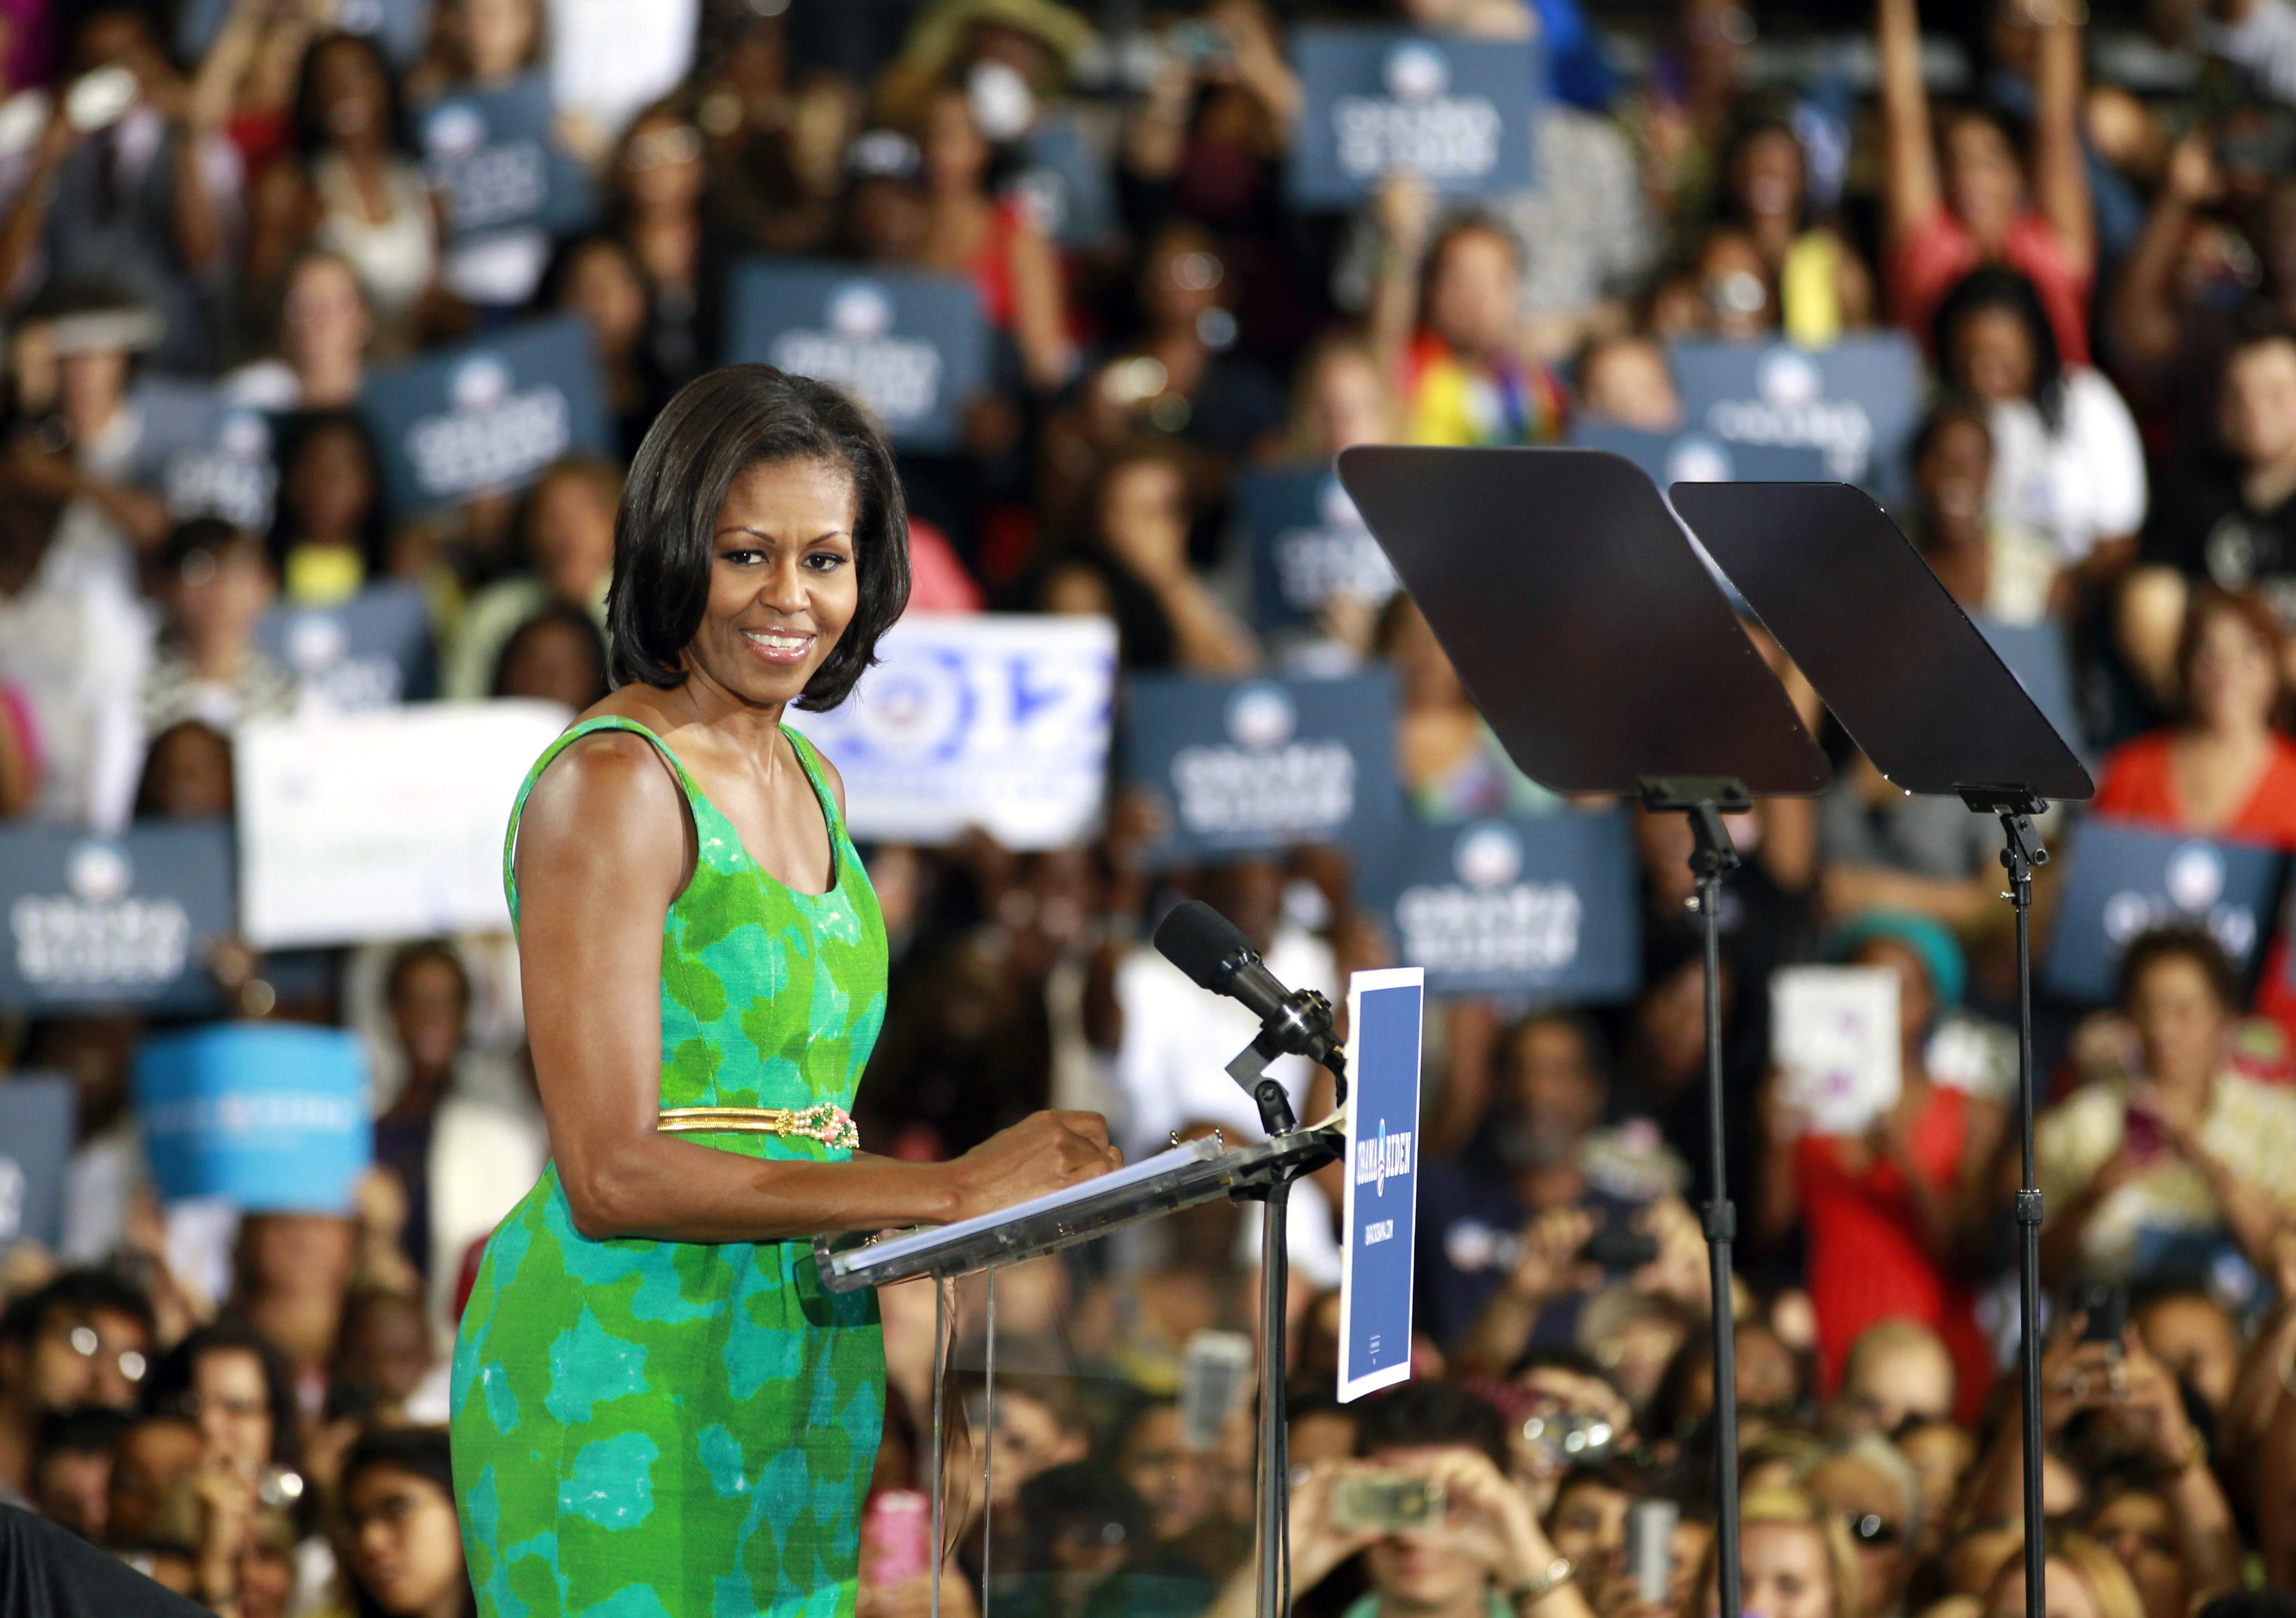 Can Michelle Obama Help Her Husband Win Cbs News